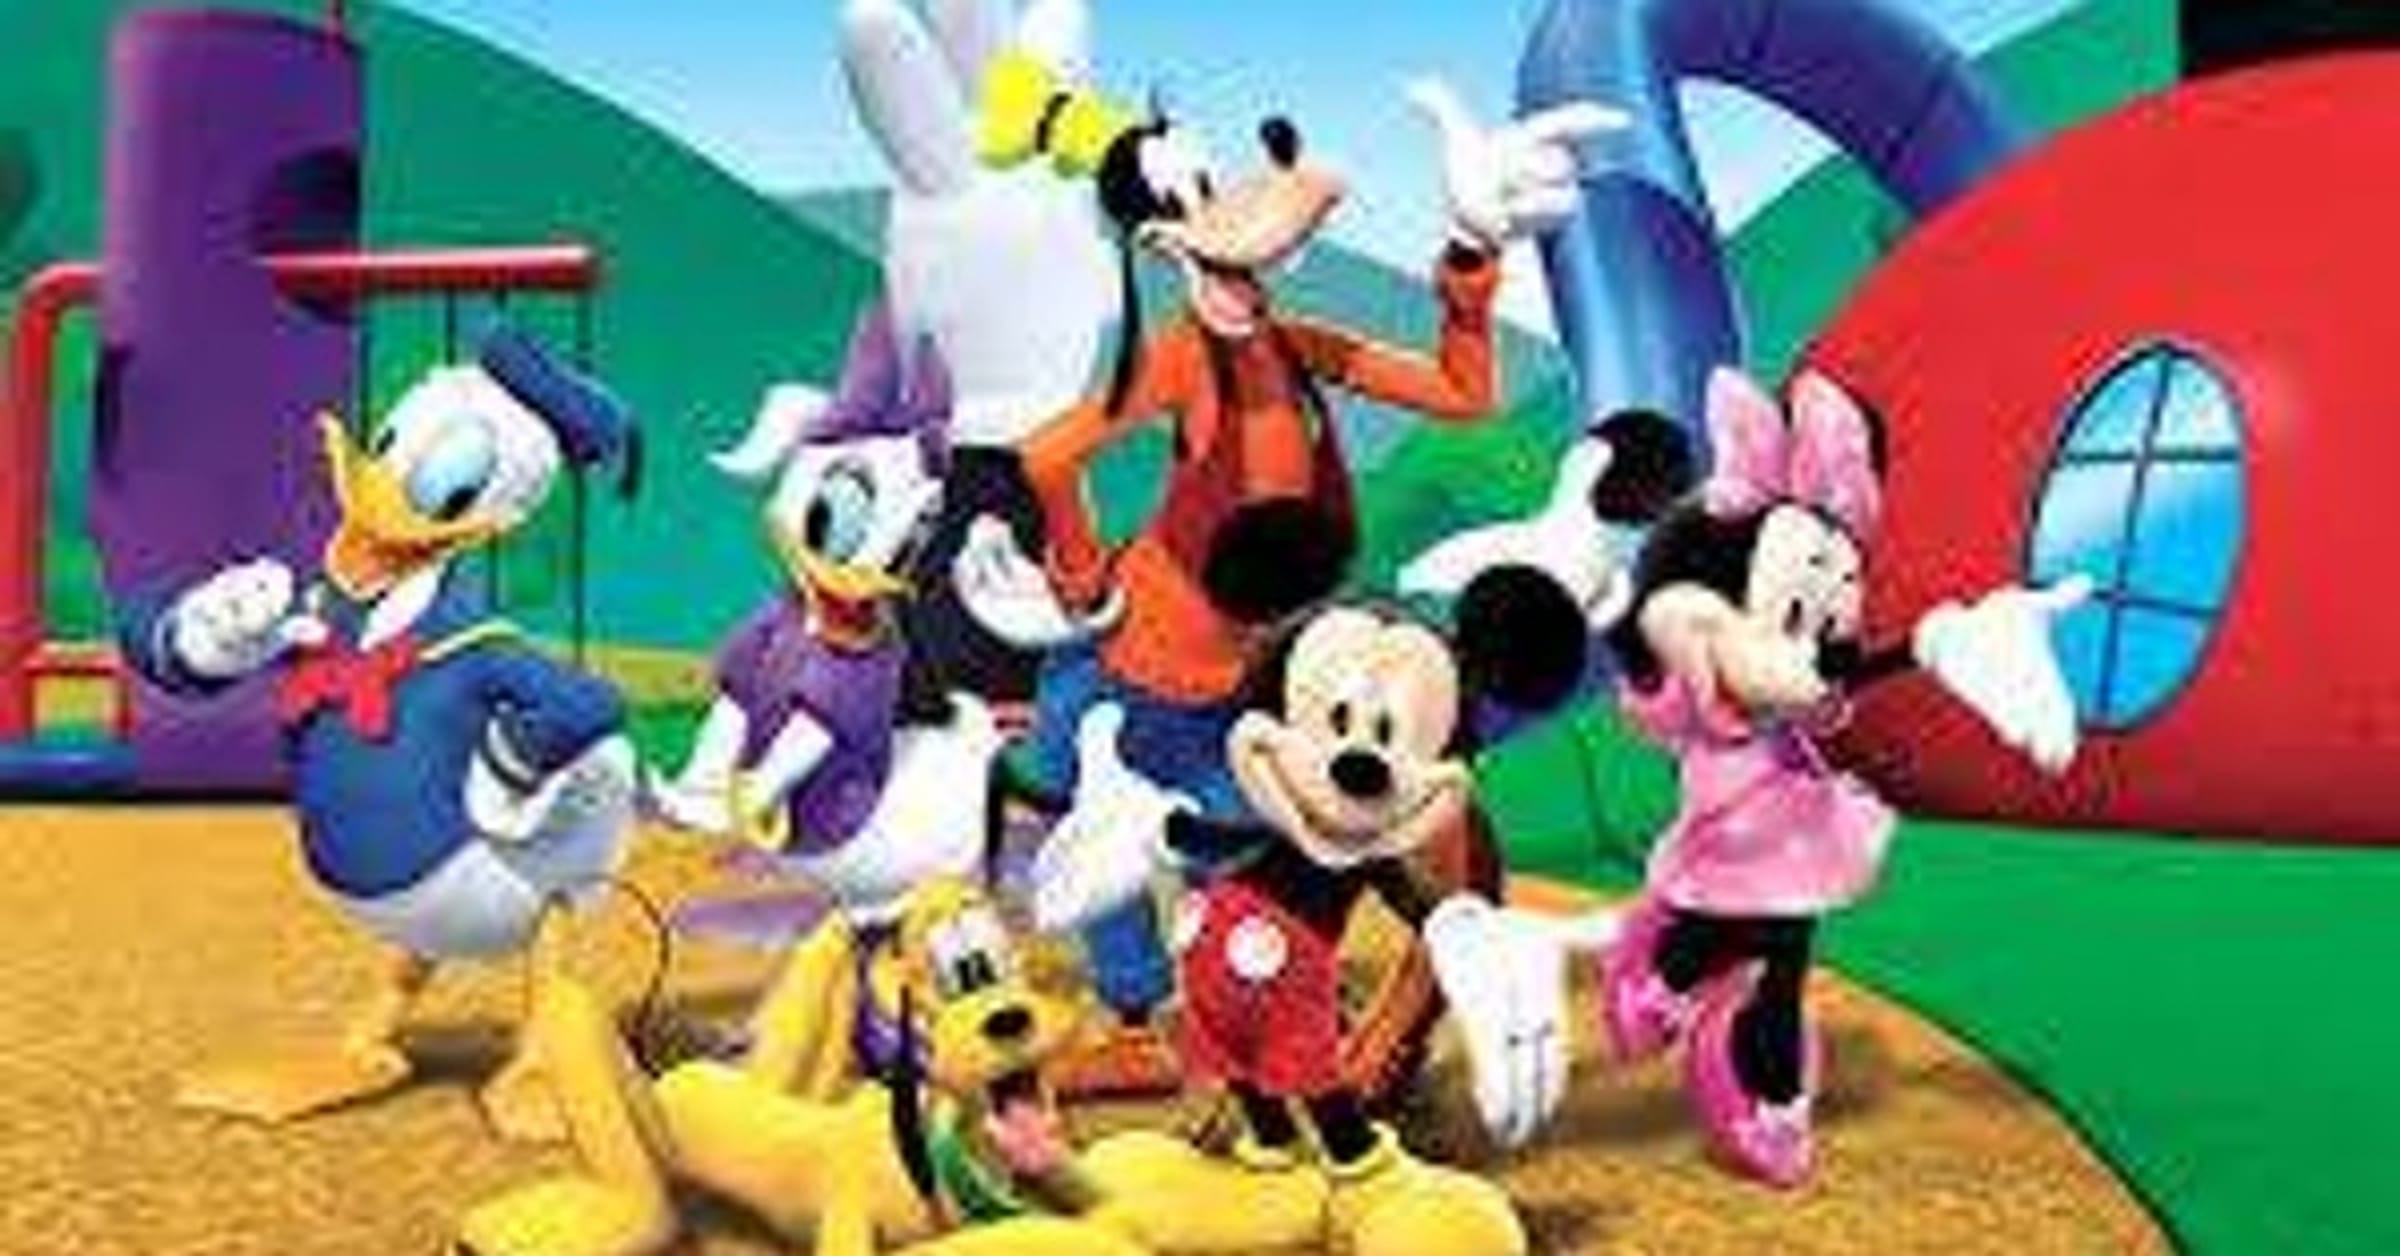 Mickey Mouse Clubhouse Theme Song (Mickey, Minnie, Donald, Daisy, Pluto &  Goofy) 